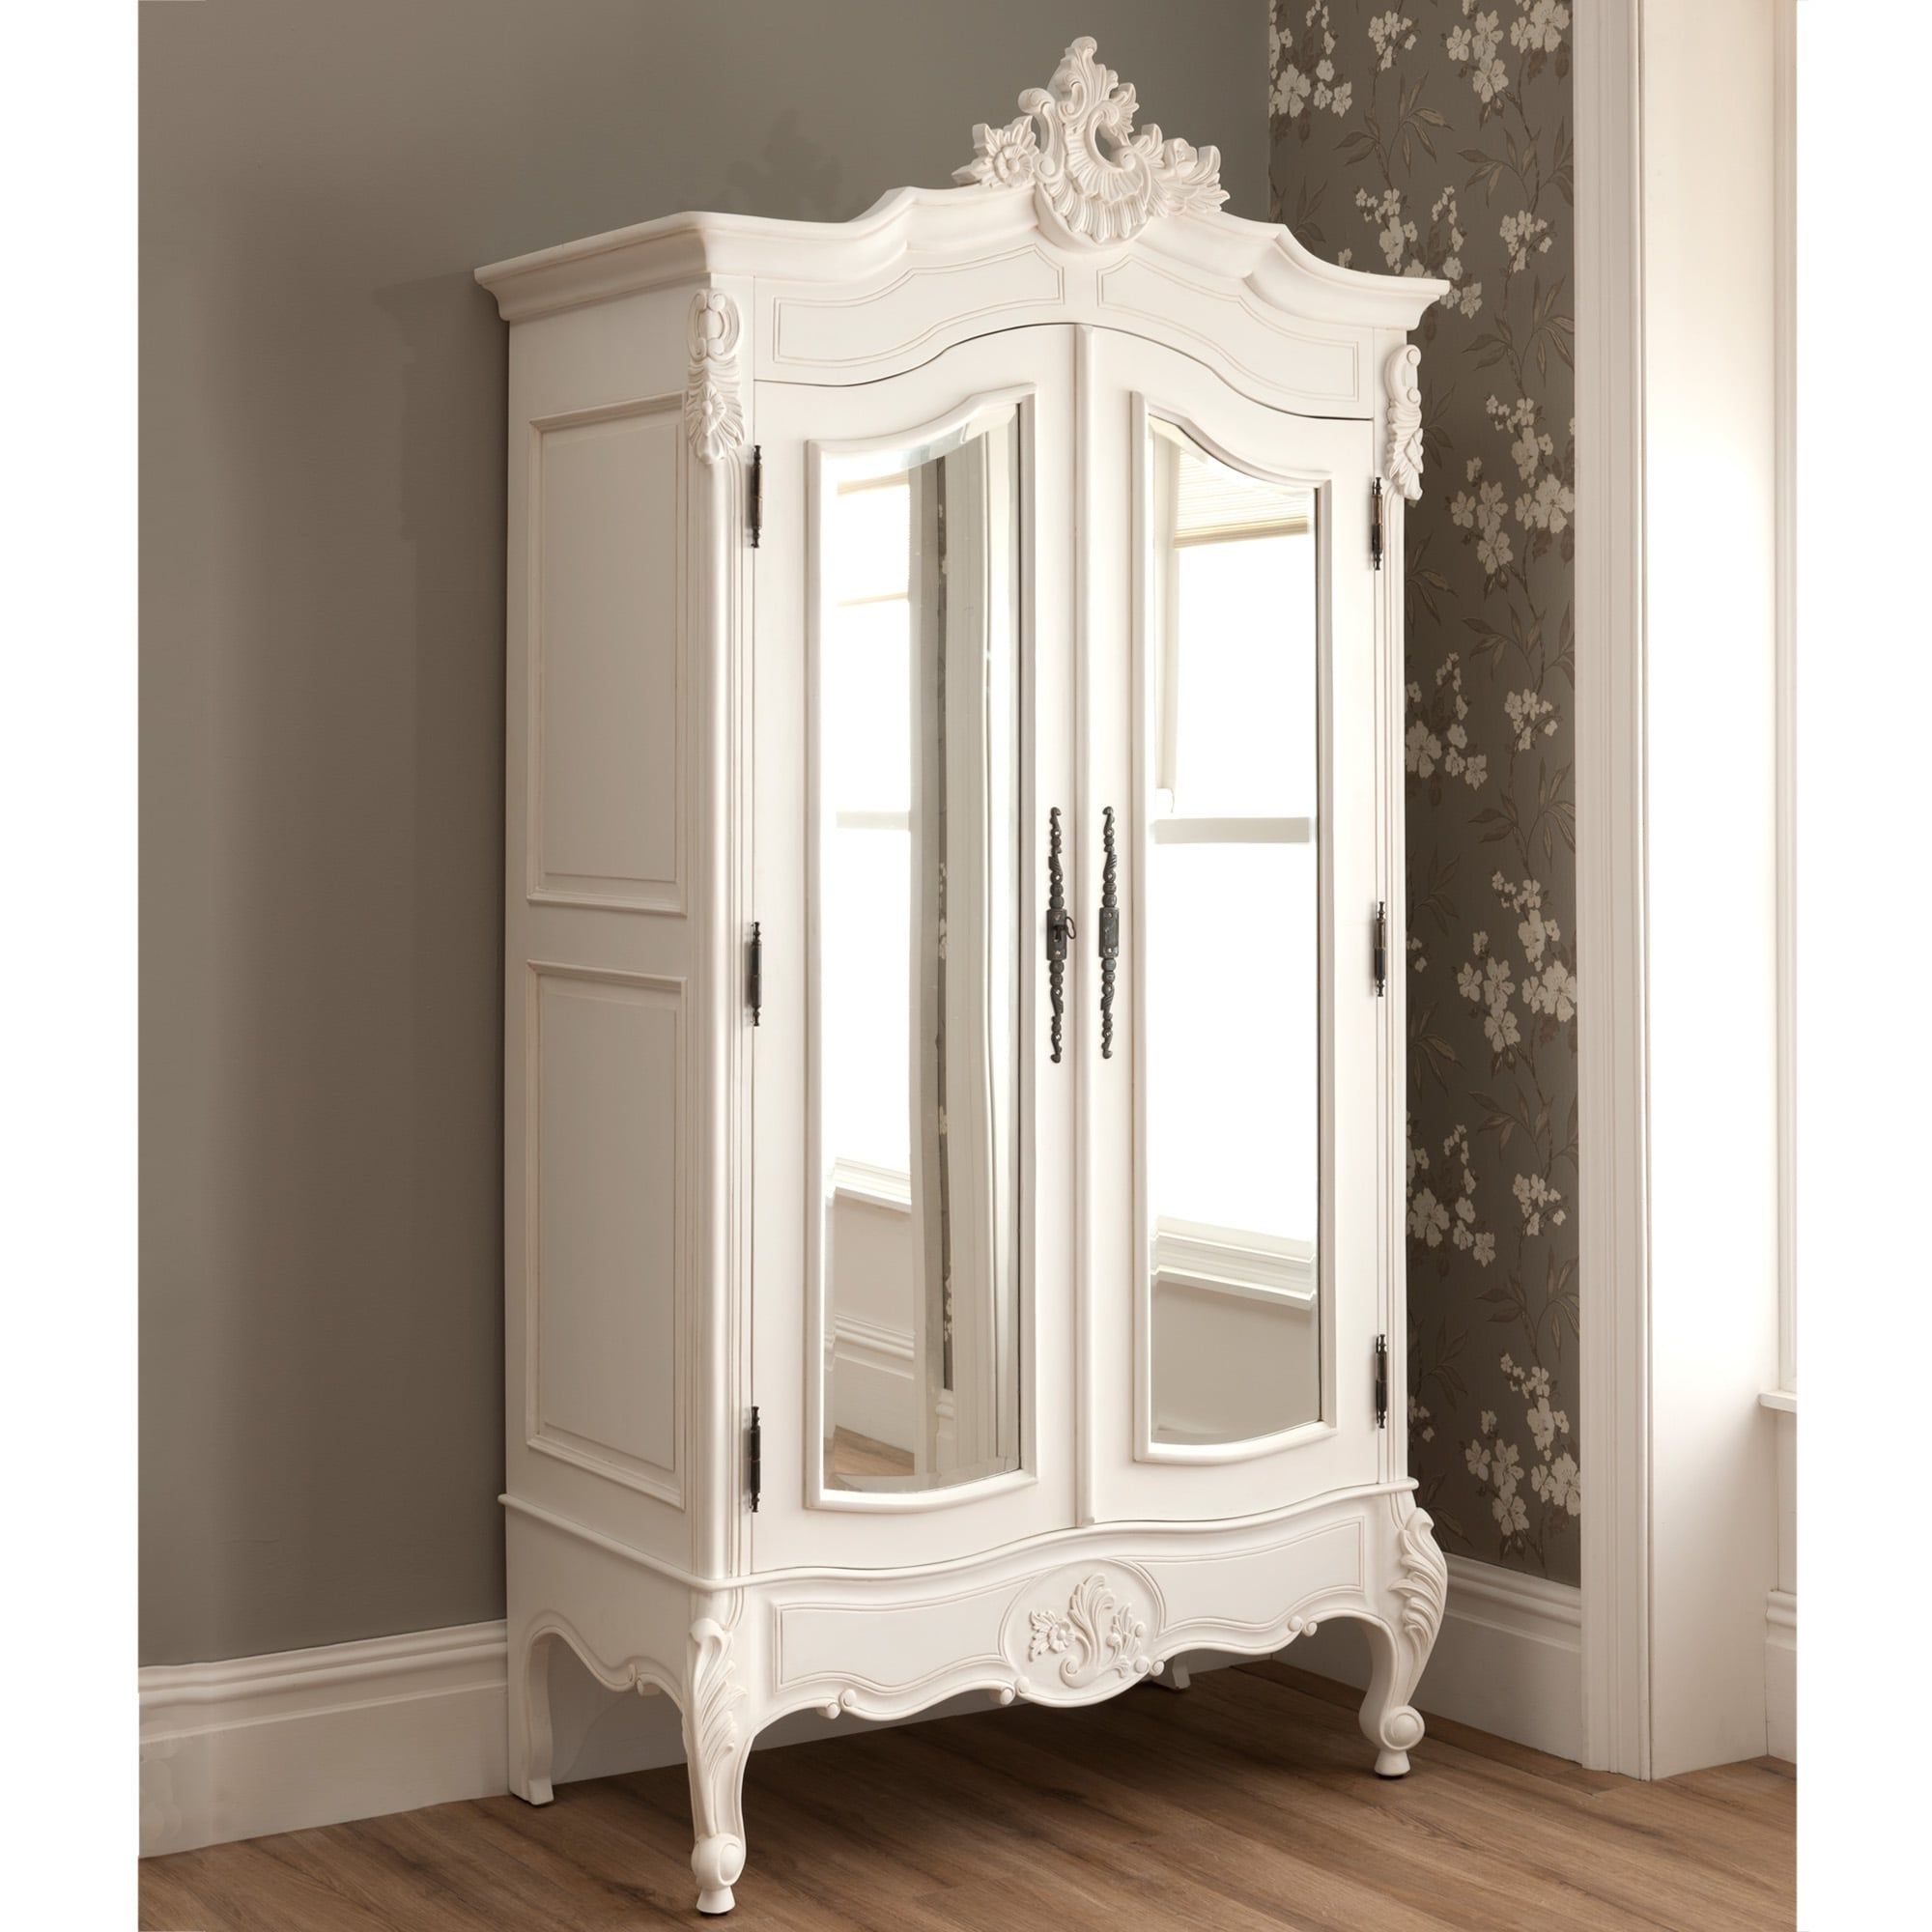 La Rochelle Antique French Mirrored 2 Door Wardrobe For Ornate Wardrobes (View 2 of 20)